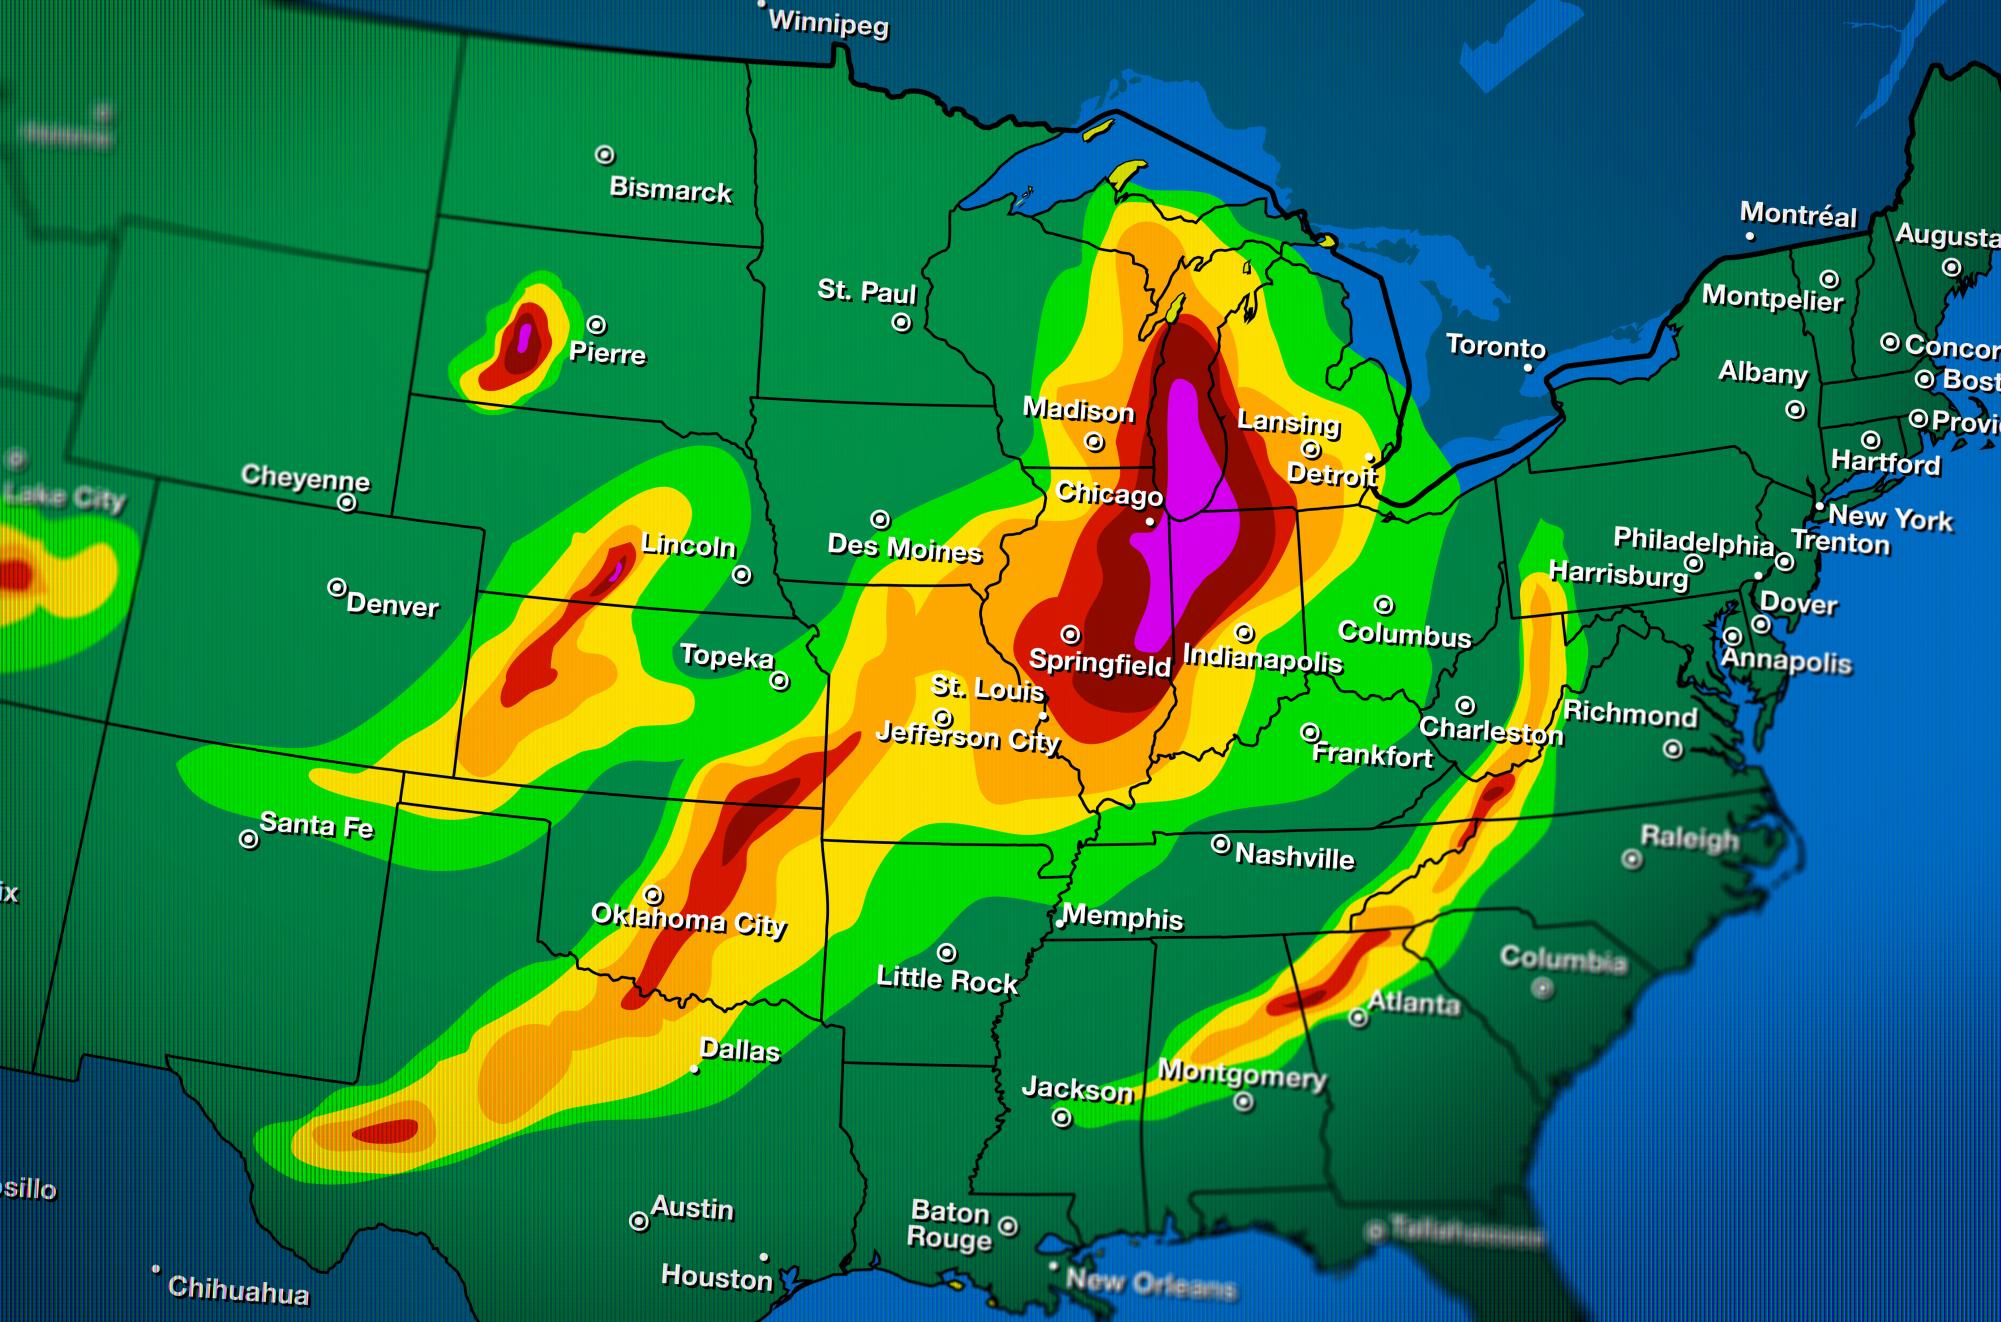 A severe weather forecast centers in the midwest. Opinion Columnist Olivia Zapf believes radar holes in weather forecasting are dangerous and need to be patched. (Courtesy of Getty Images)